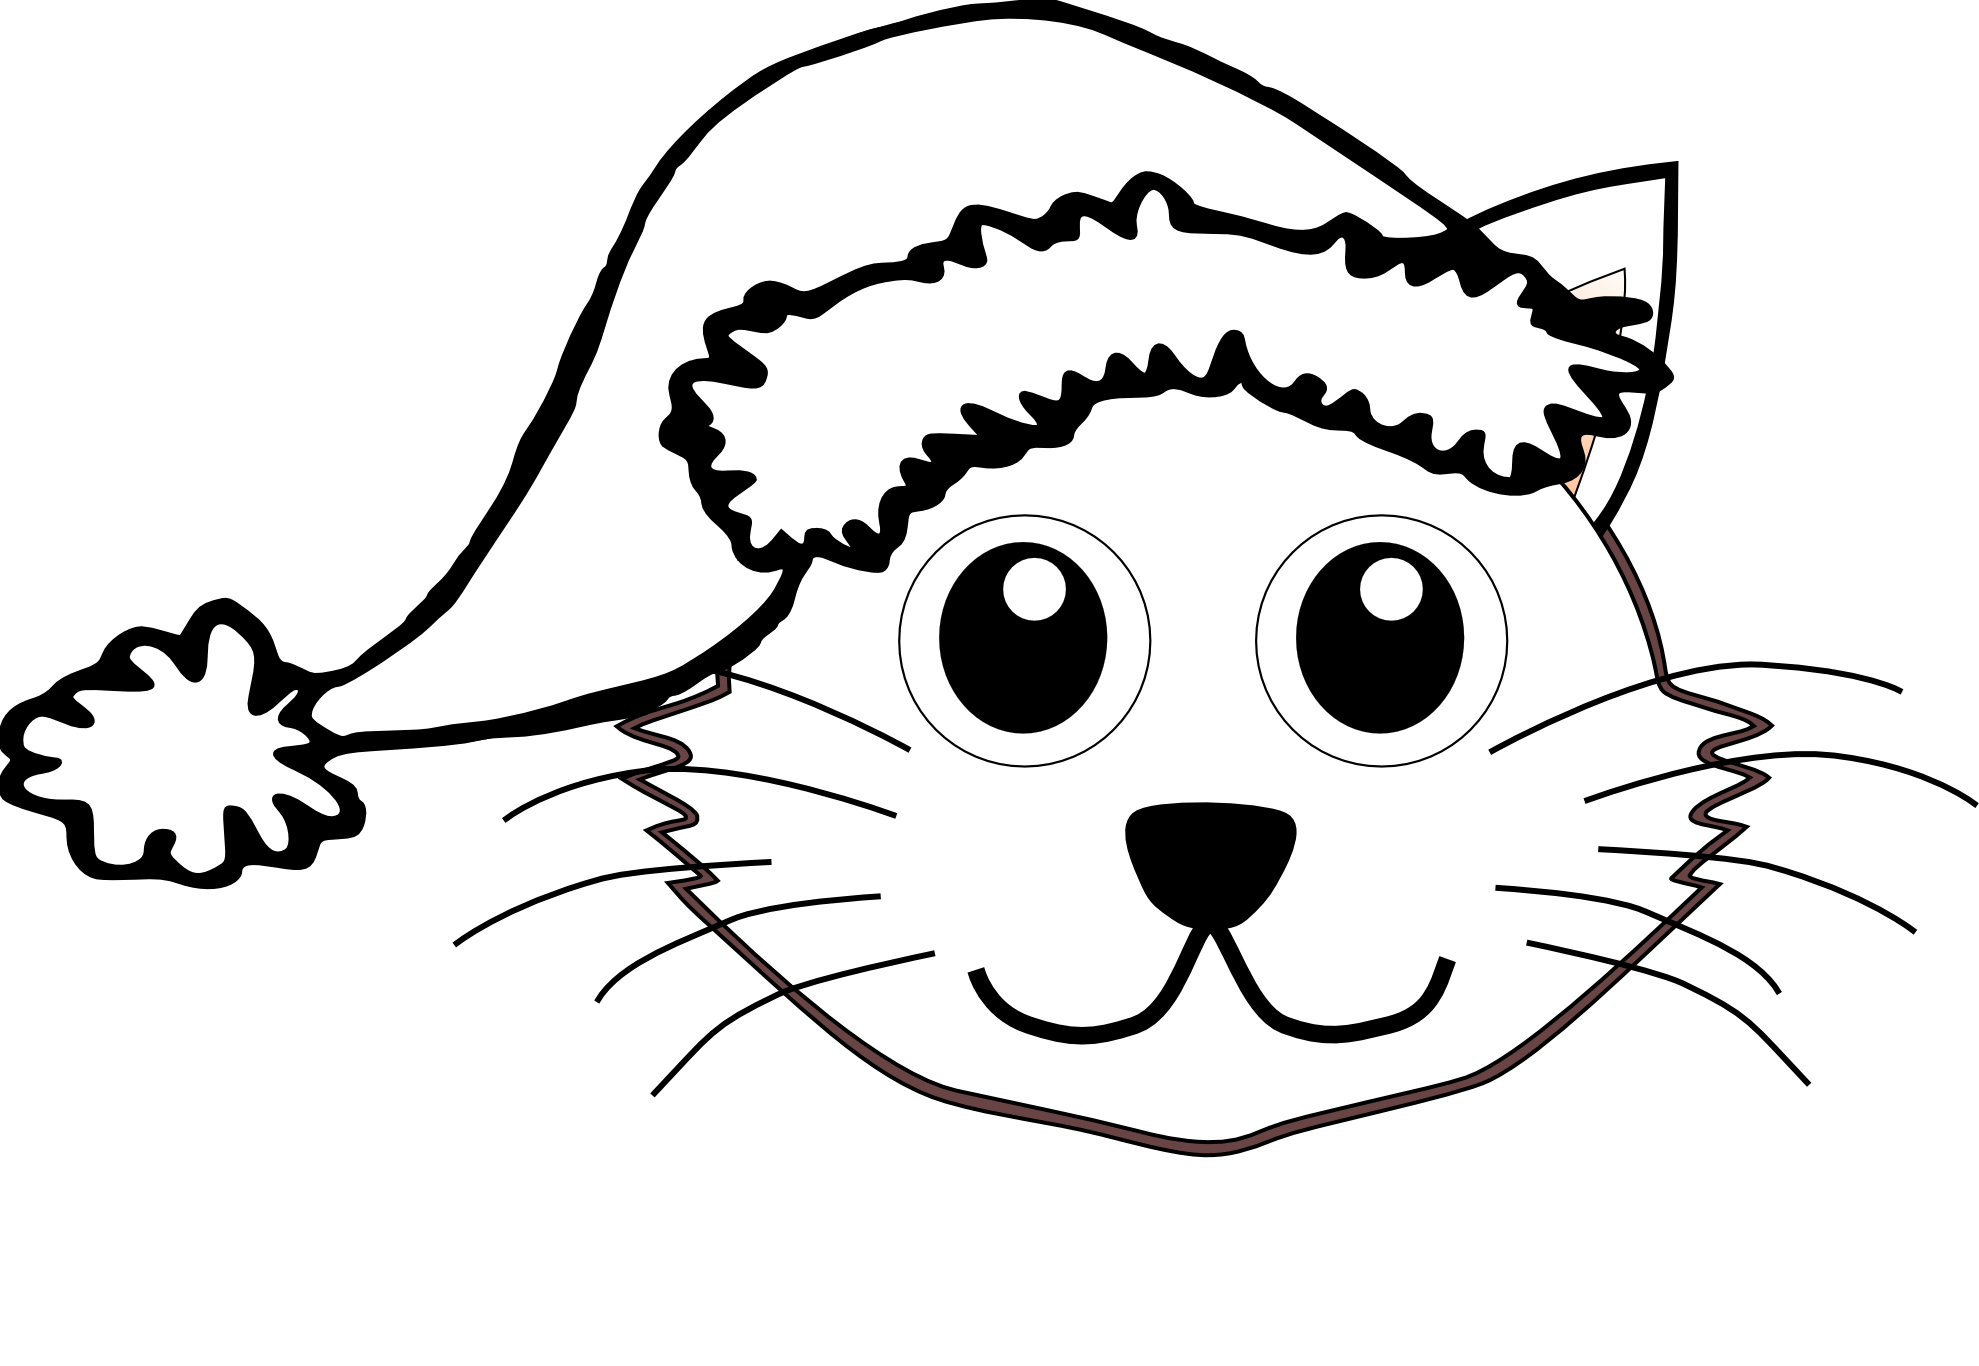 Black And White Cartoon Cat - Clipart library